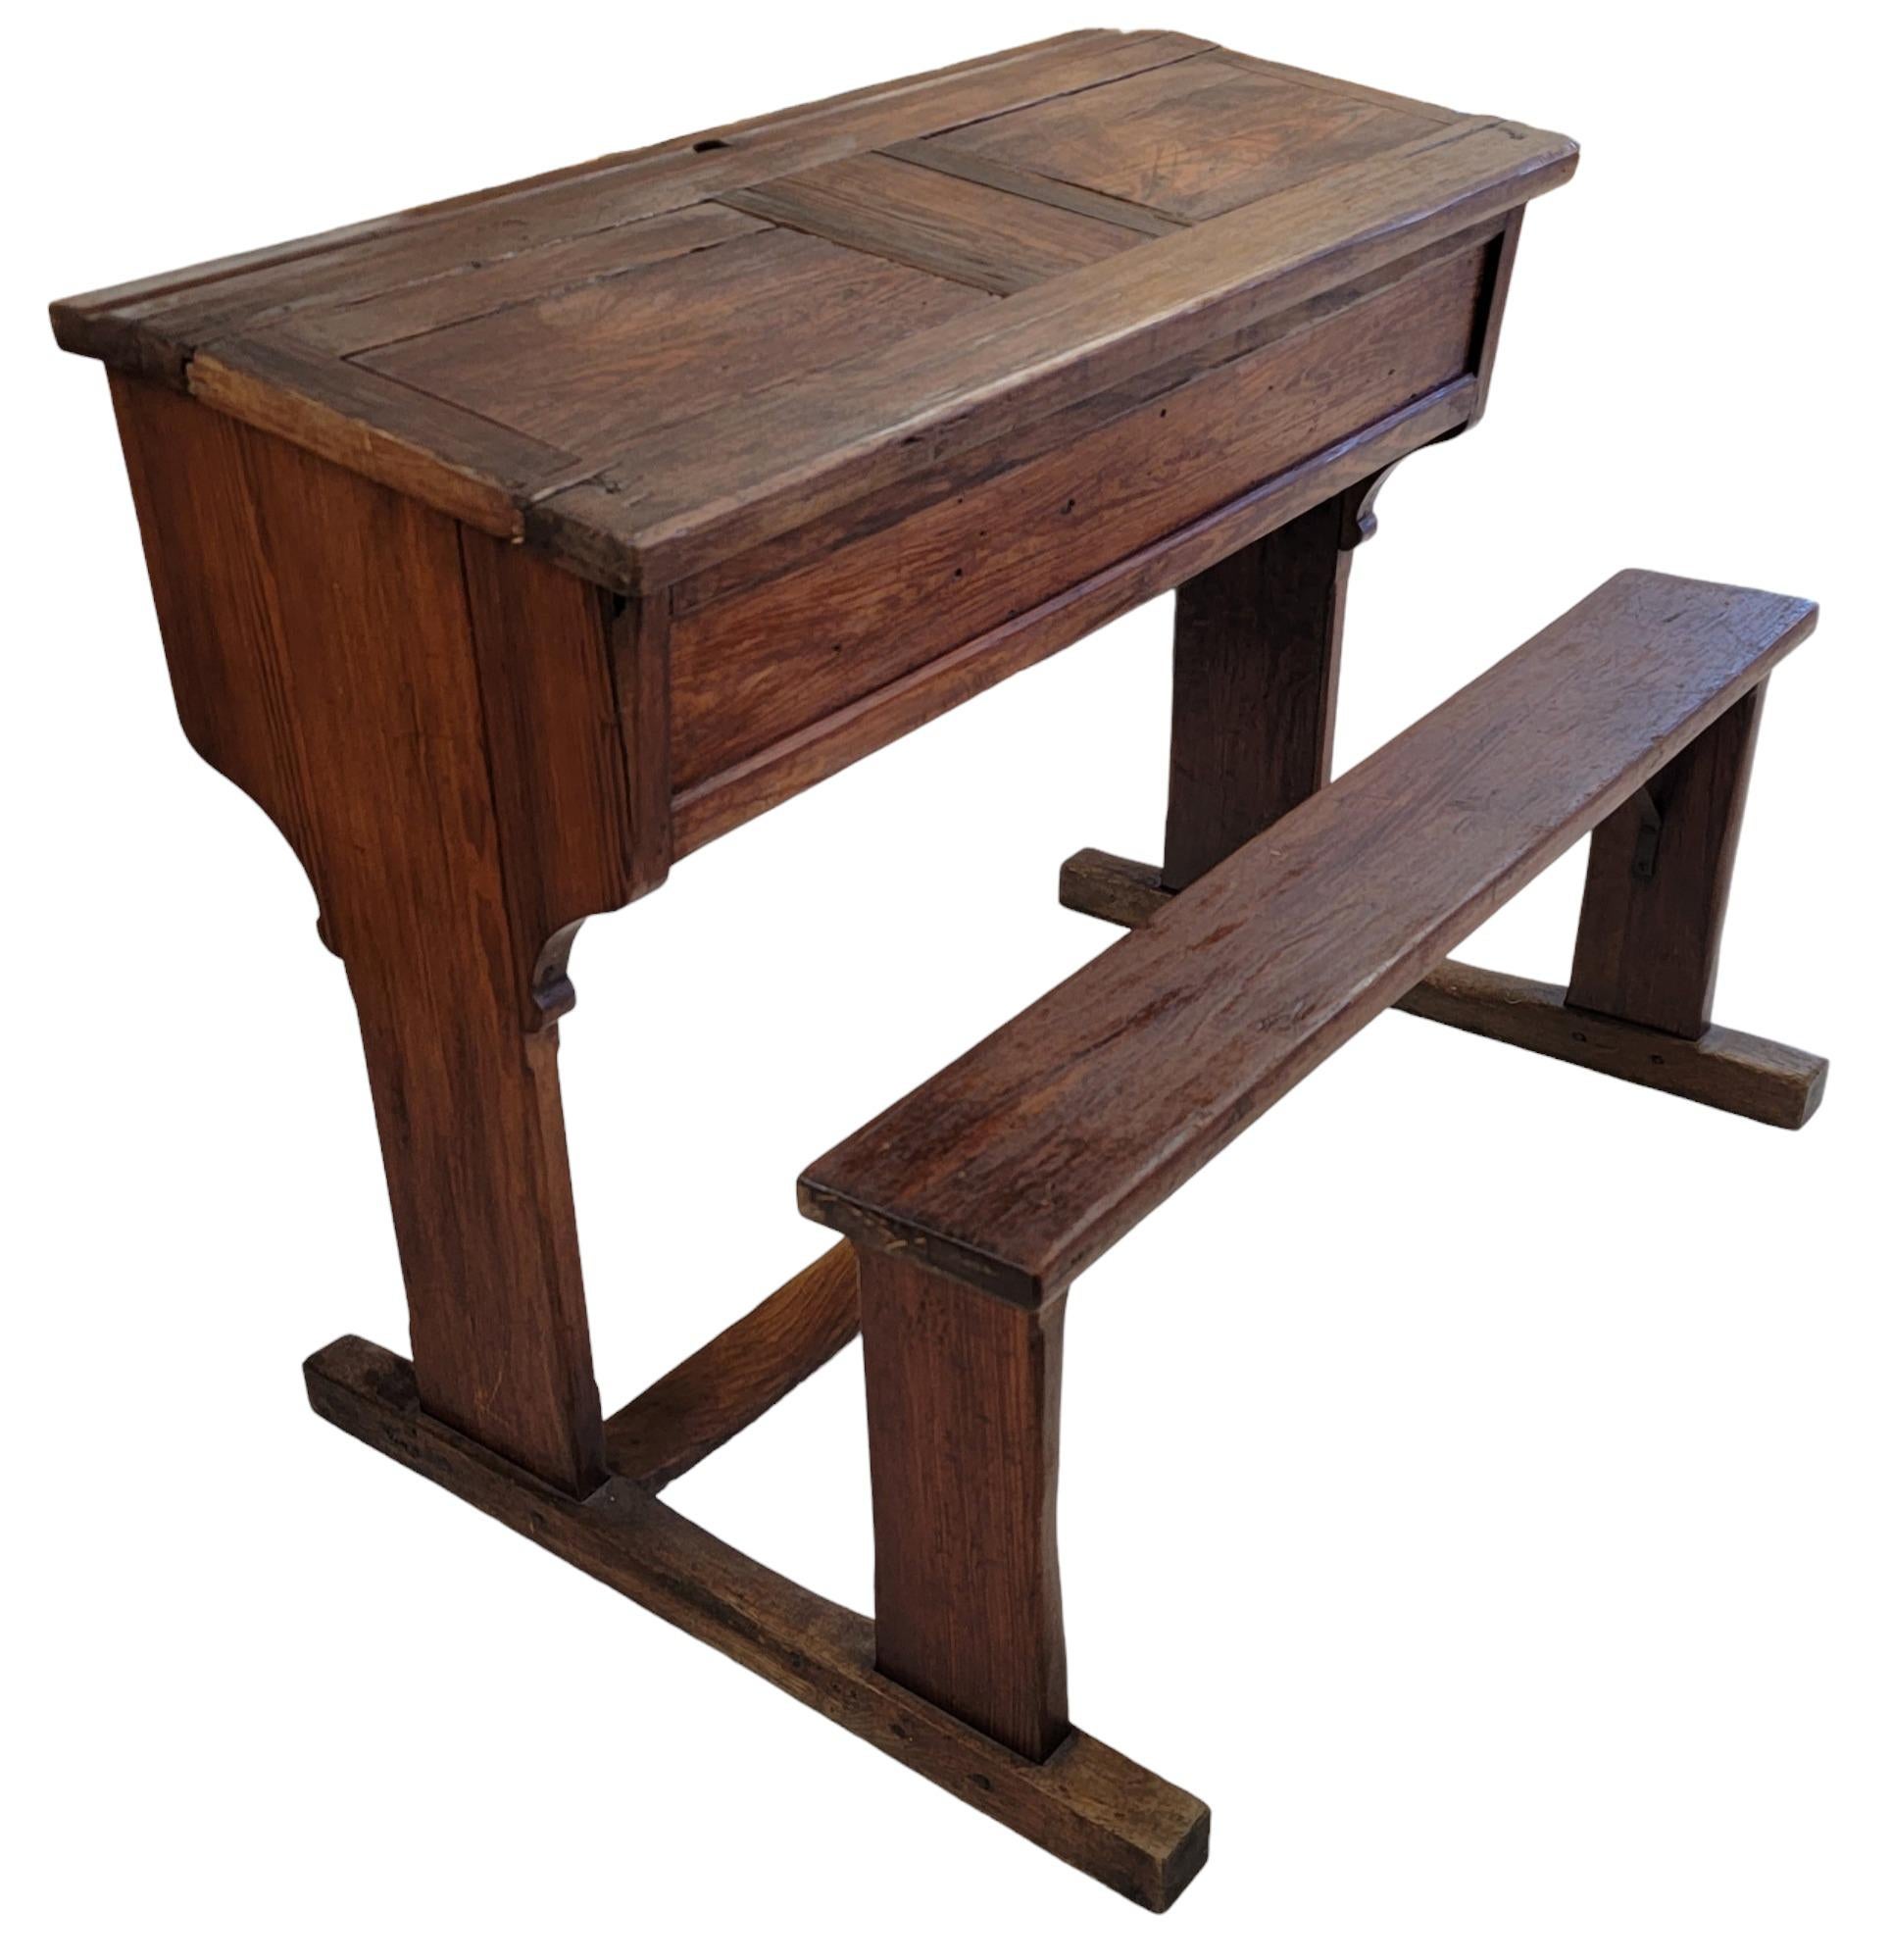 Rare 19thc Wooden French School Bench Desk With 2 Slide out compartments. This desk may fit 2 people working on each side. The bench is connected to the desk through the bottom Rungs. There are 2 metal rods underneath the bench for support. The